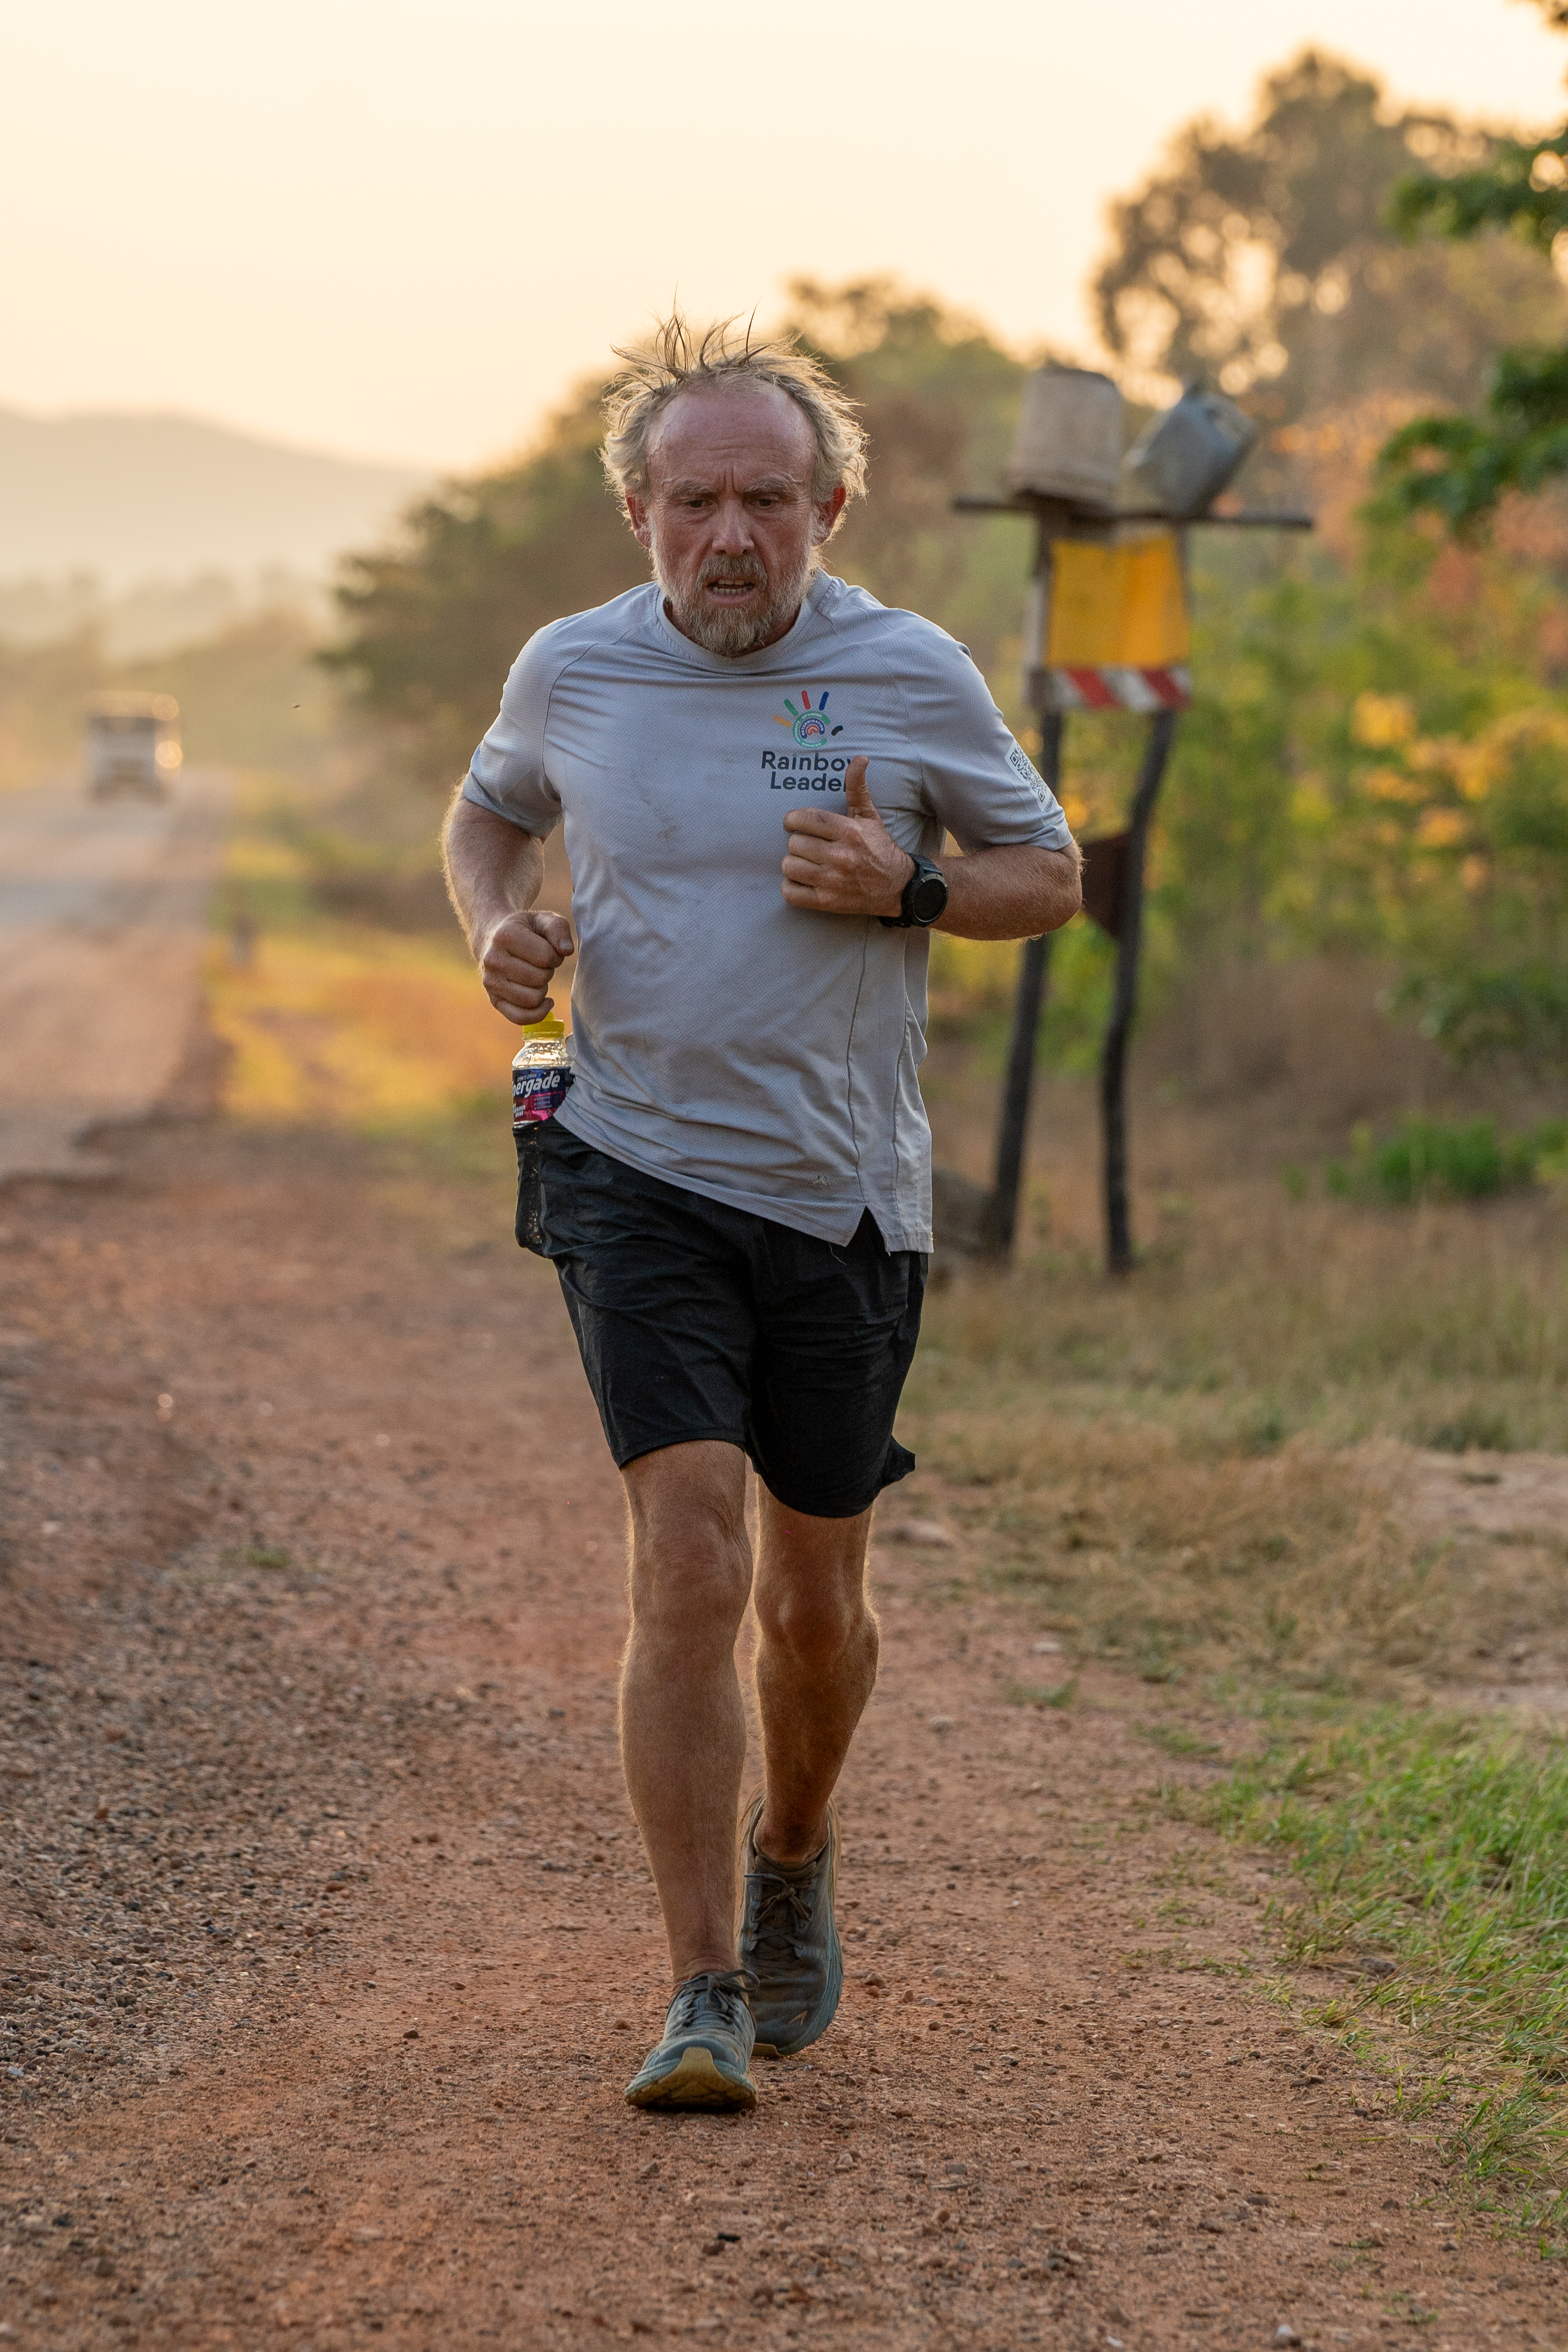 ultra-runner’s world record attempt in africa in doubt as he faces safety issues